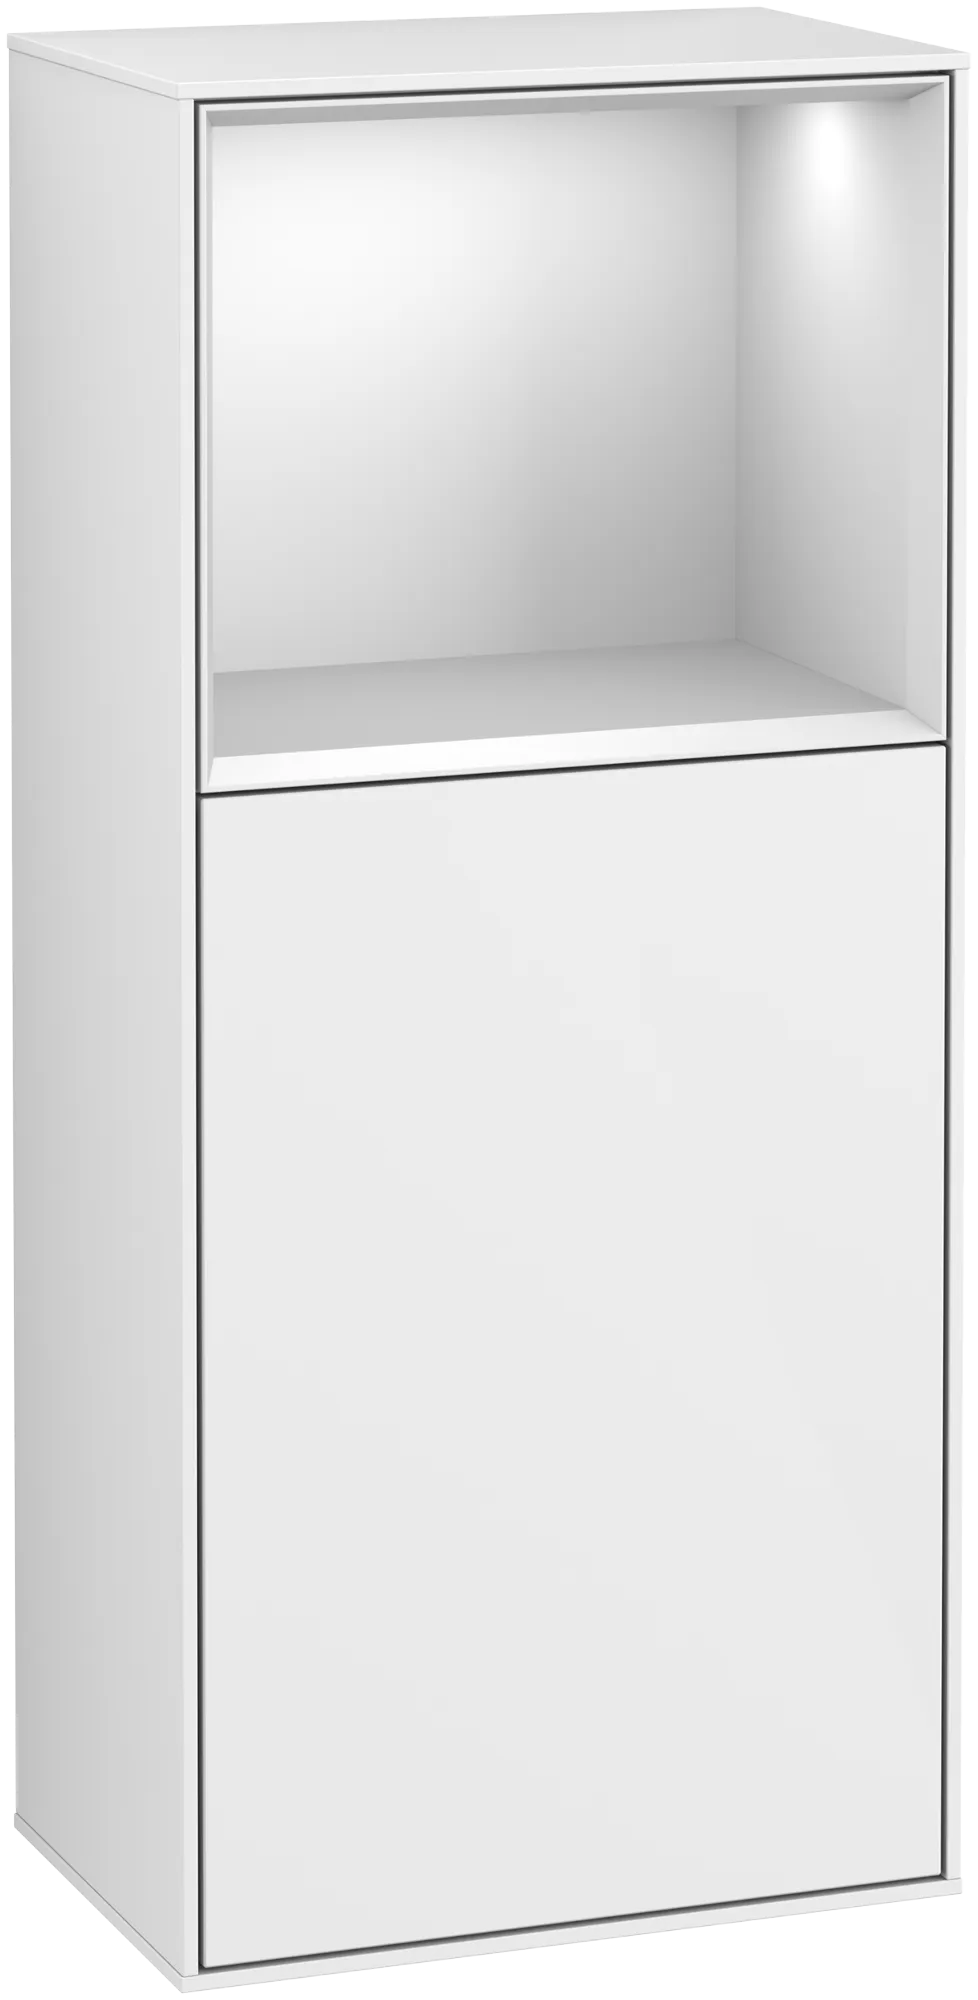 Obrázek VILLEROY BOCH Finion Side cabinet, with lighting, 1 door, 418 x 936 x 270 mm, Glossy White Lacquer / White Matt Lacquer #G510MTGF